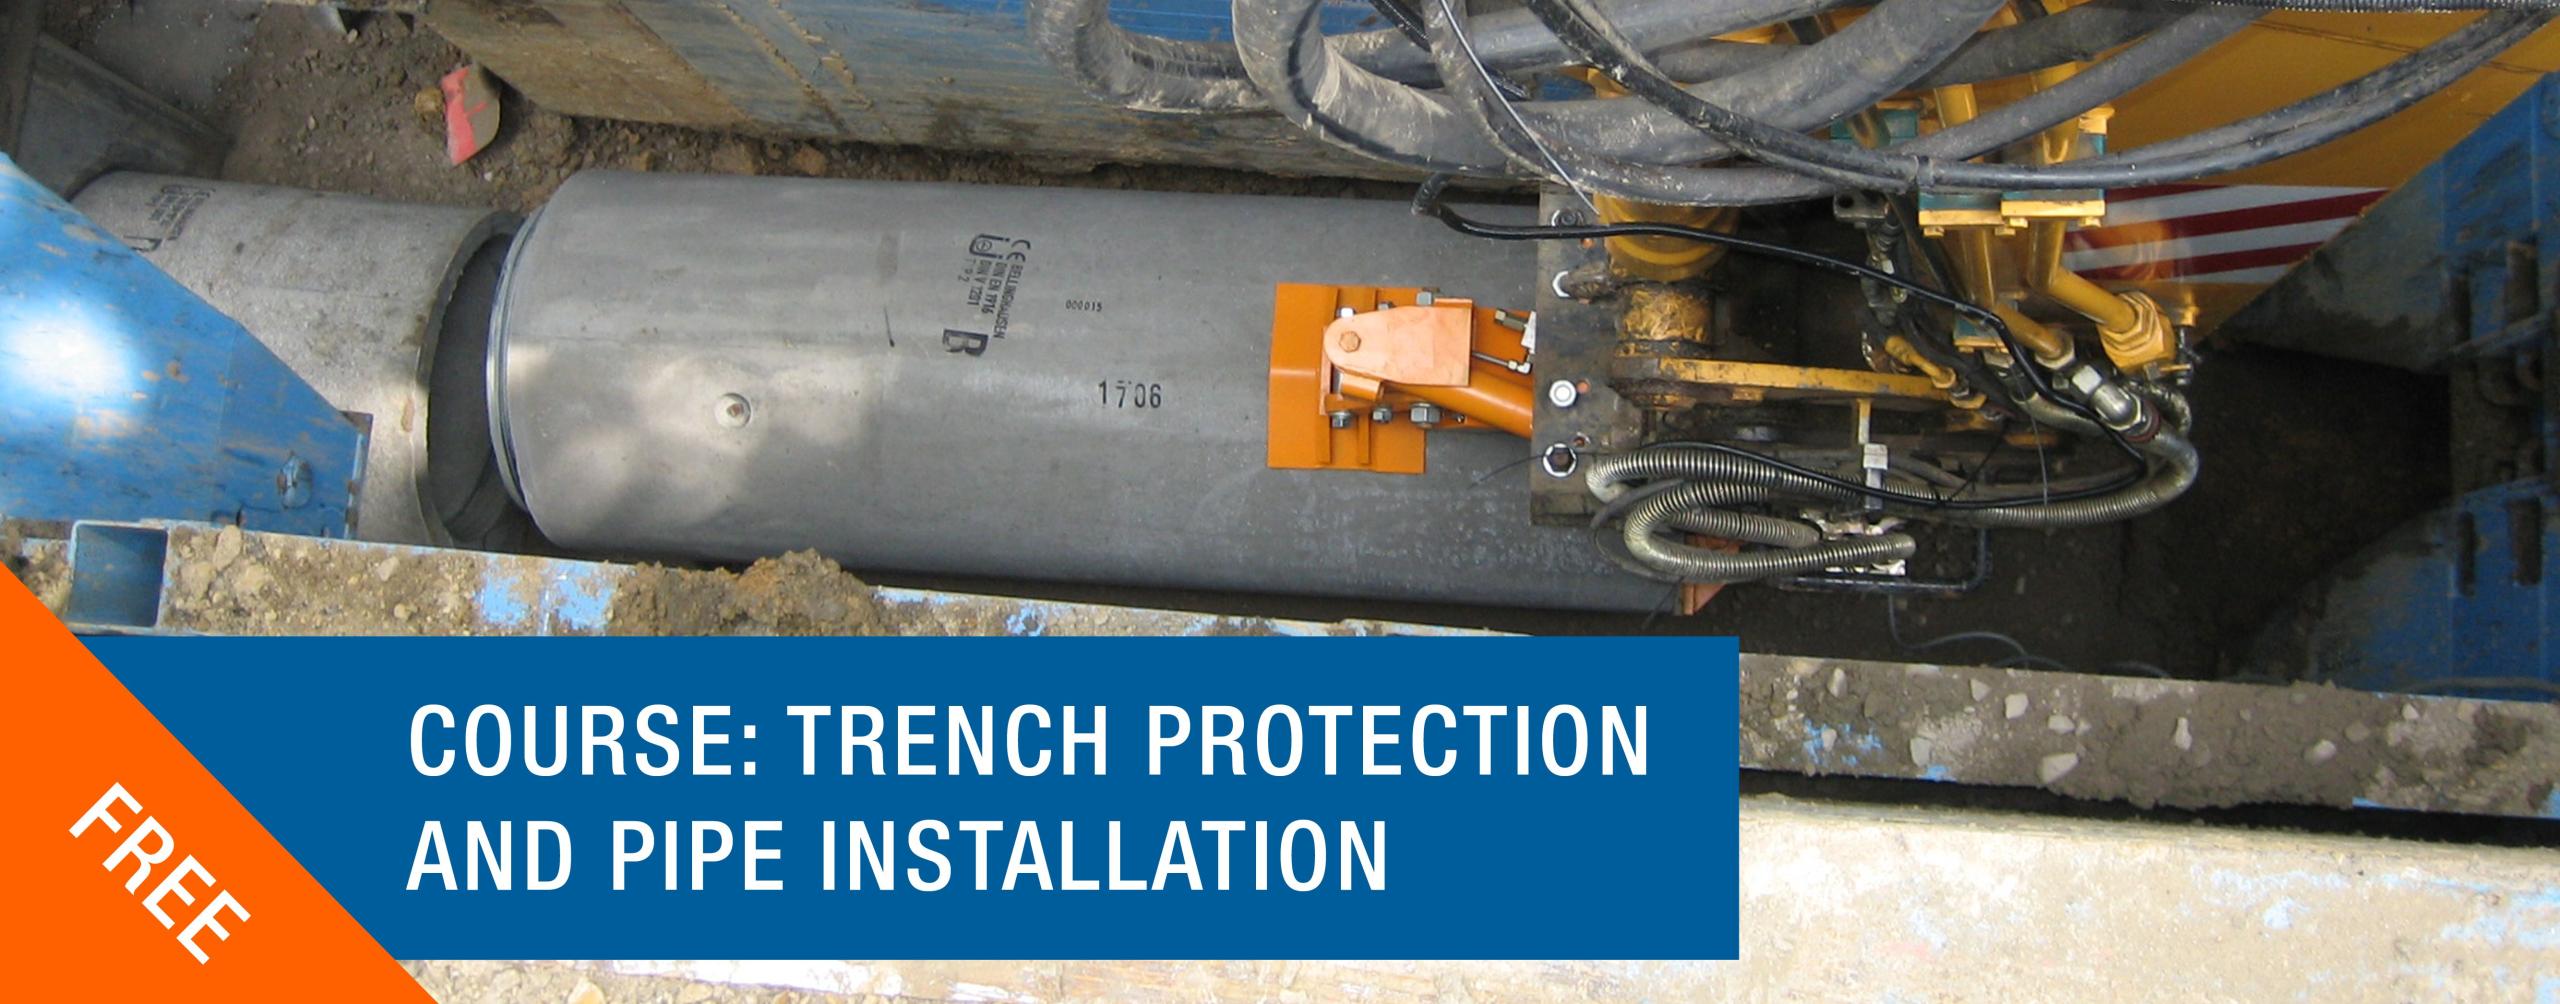 UNITRACC.com Trench Protection and Pipe Installation (Course BE-50)